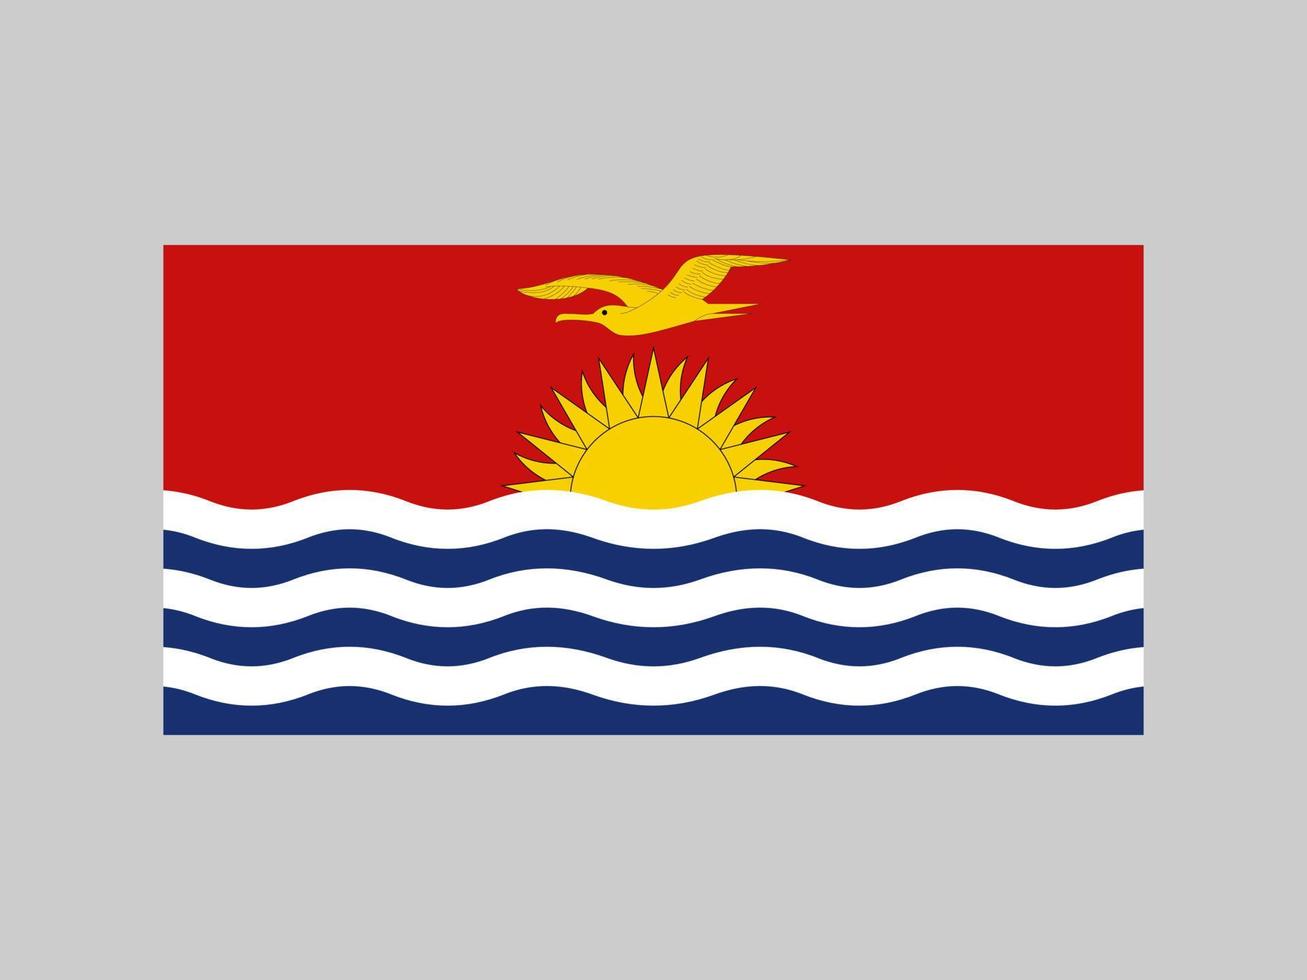 Kiribati flag, official colors and proportion. Vector illustration.